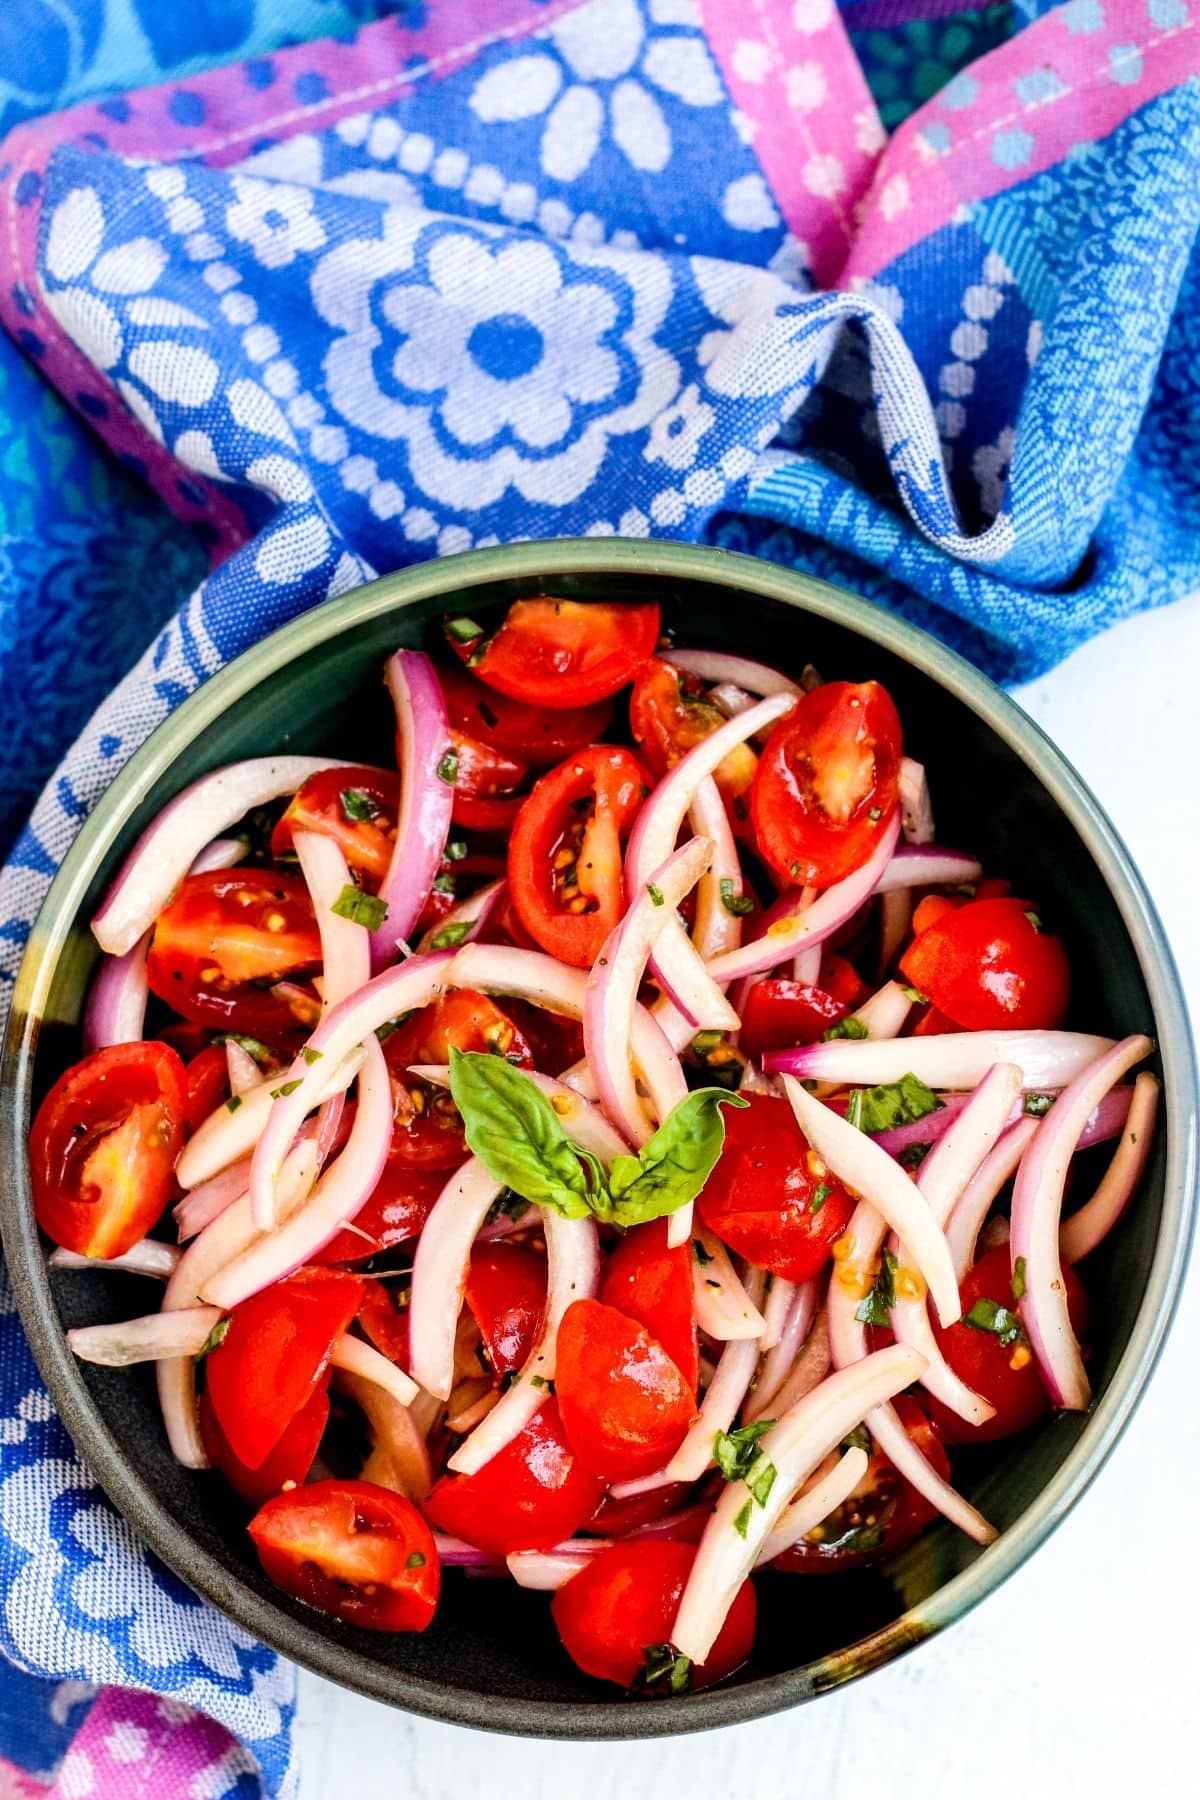 Bowl of tomato and red onion salad next to a purple and blue napkin.